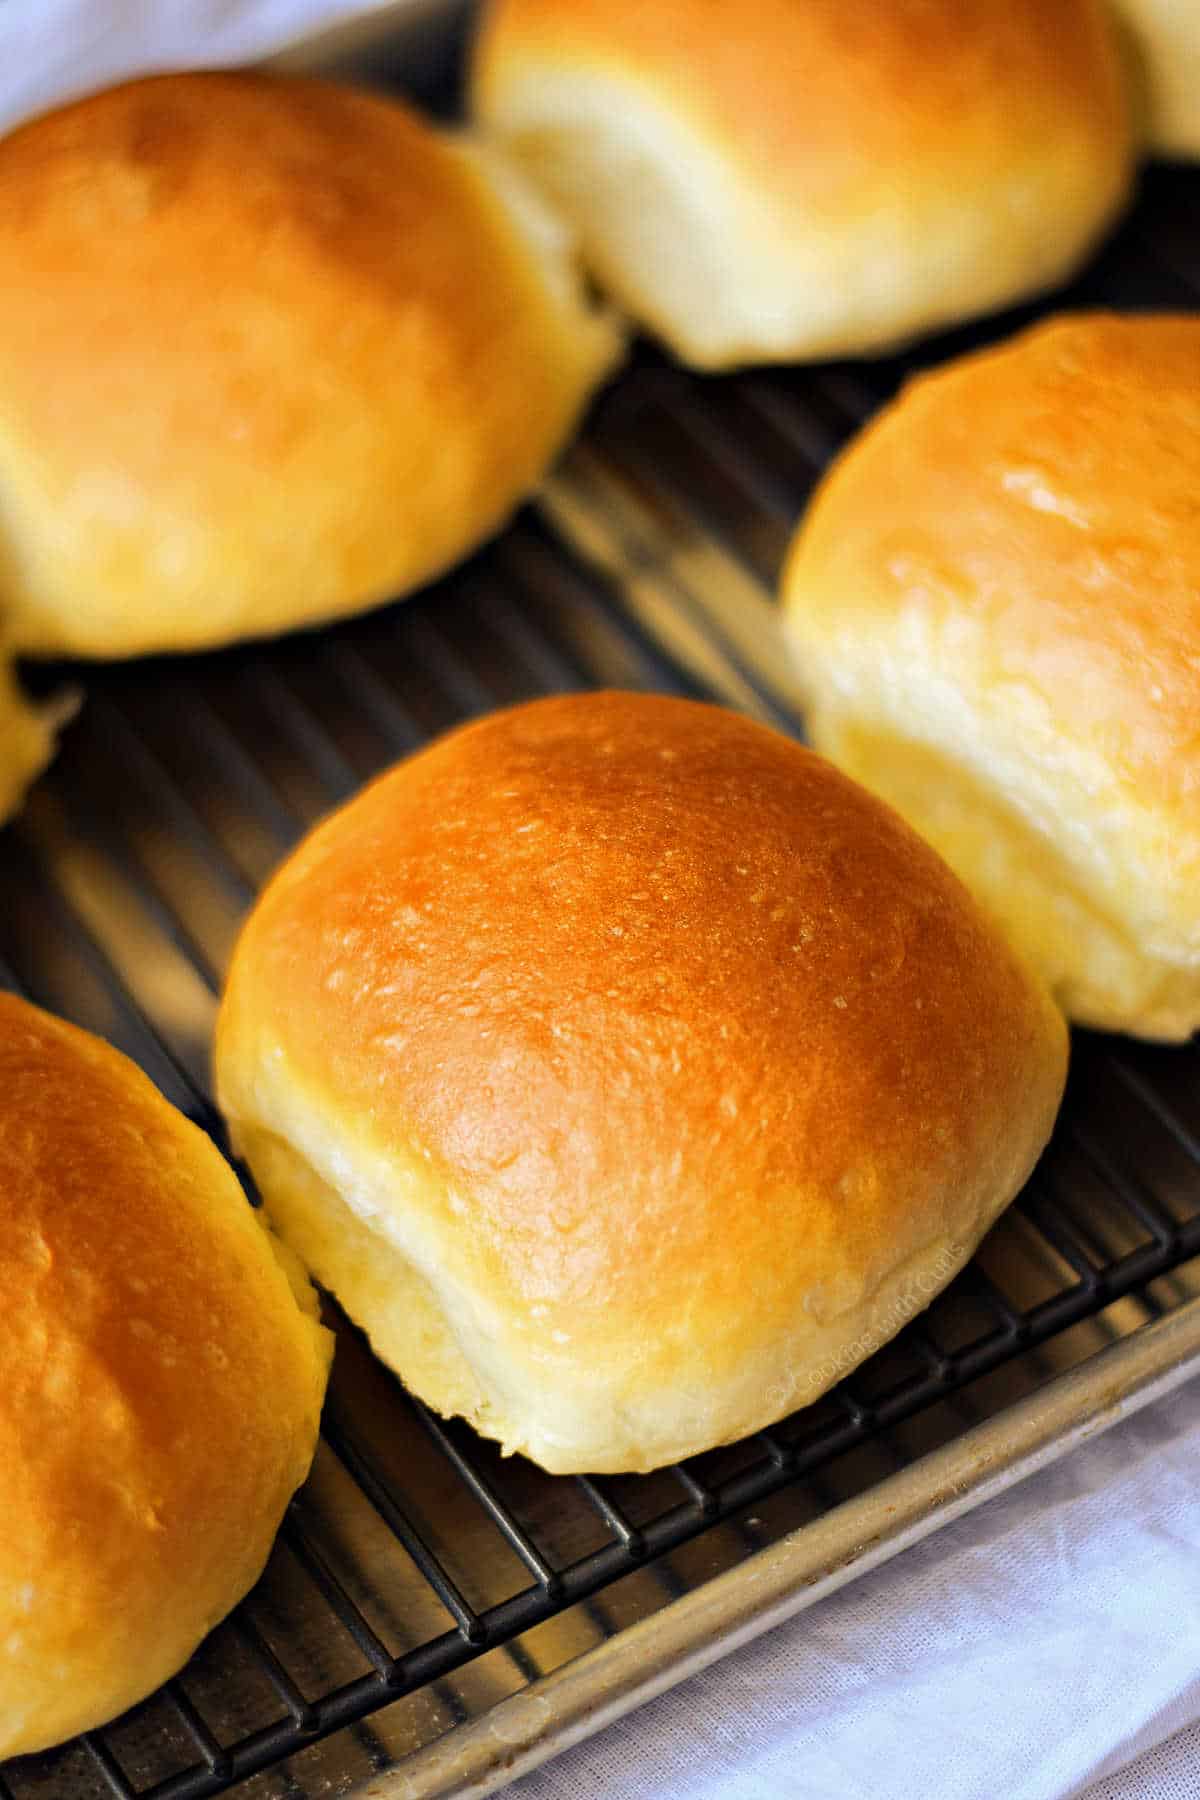 Four hamburger buns on a wire cooking rack.